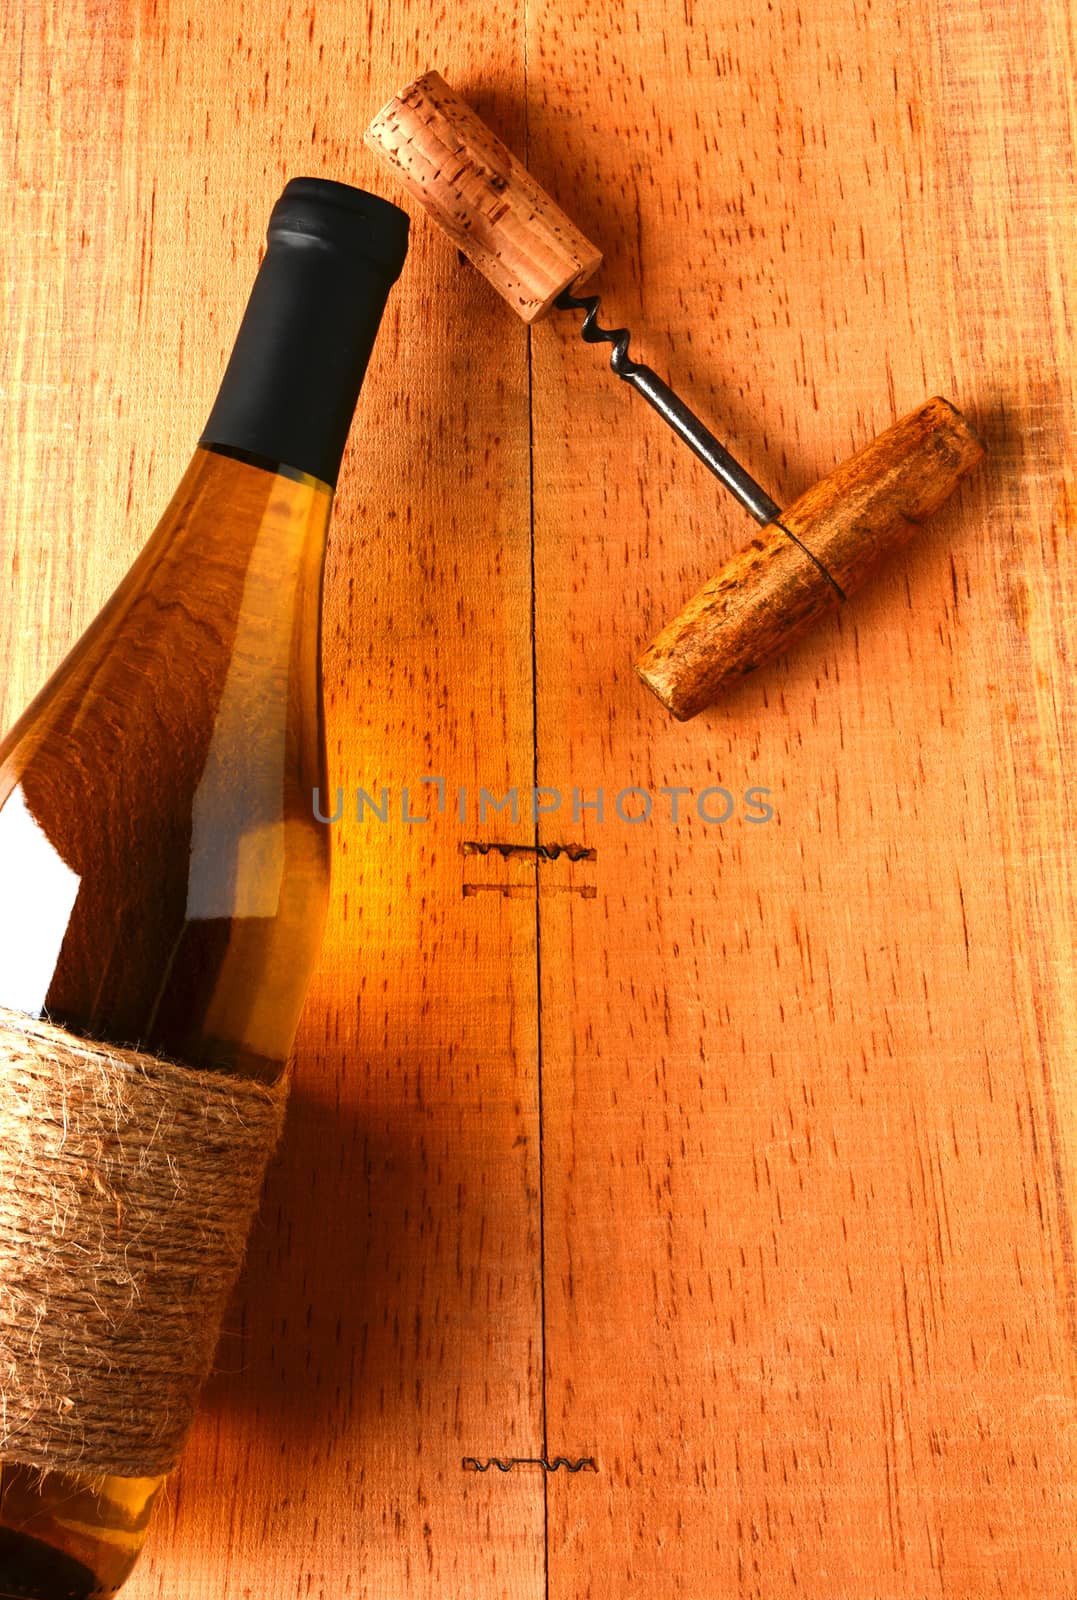 Chardonnay Bottle and Corkscrew on Wood Background by sCukrov